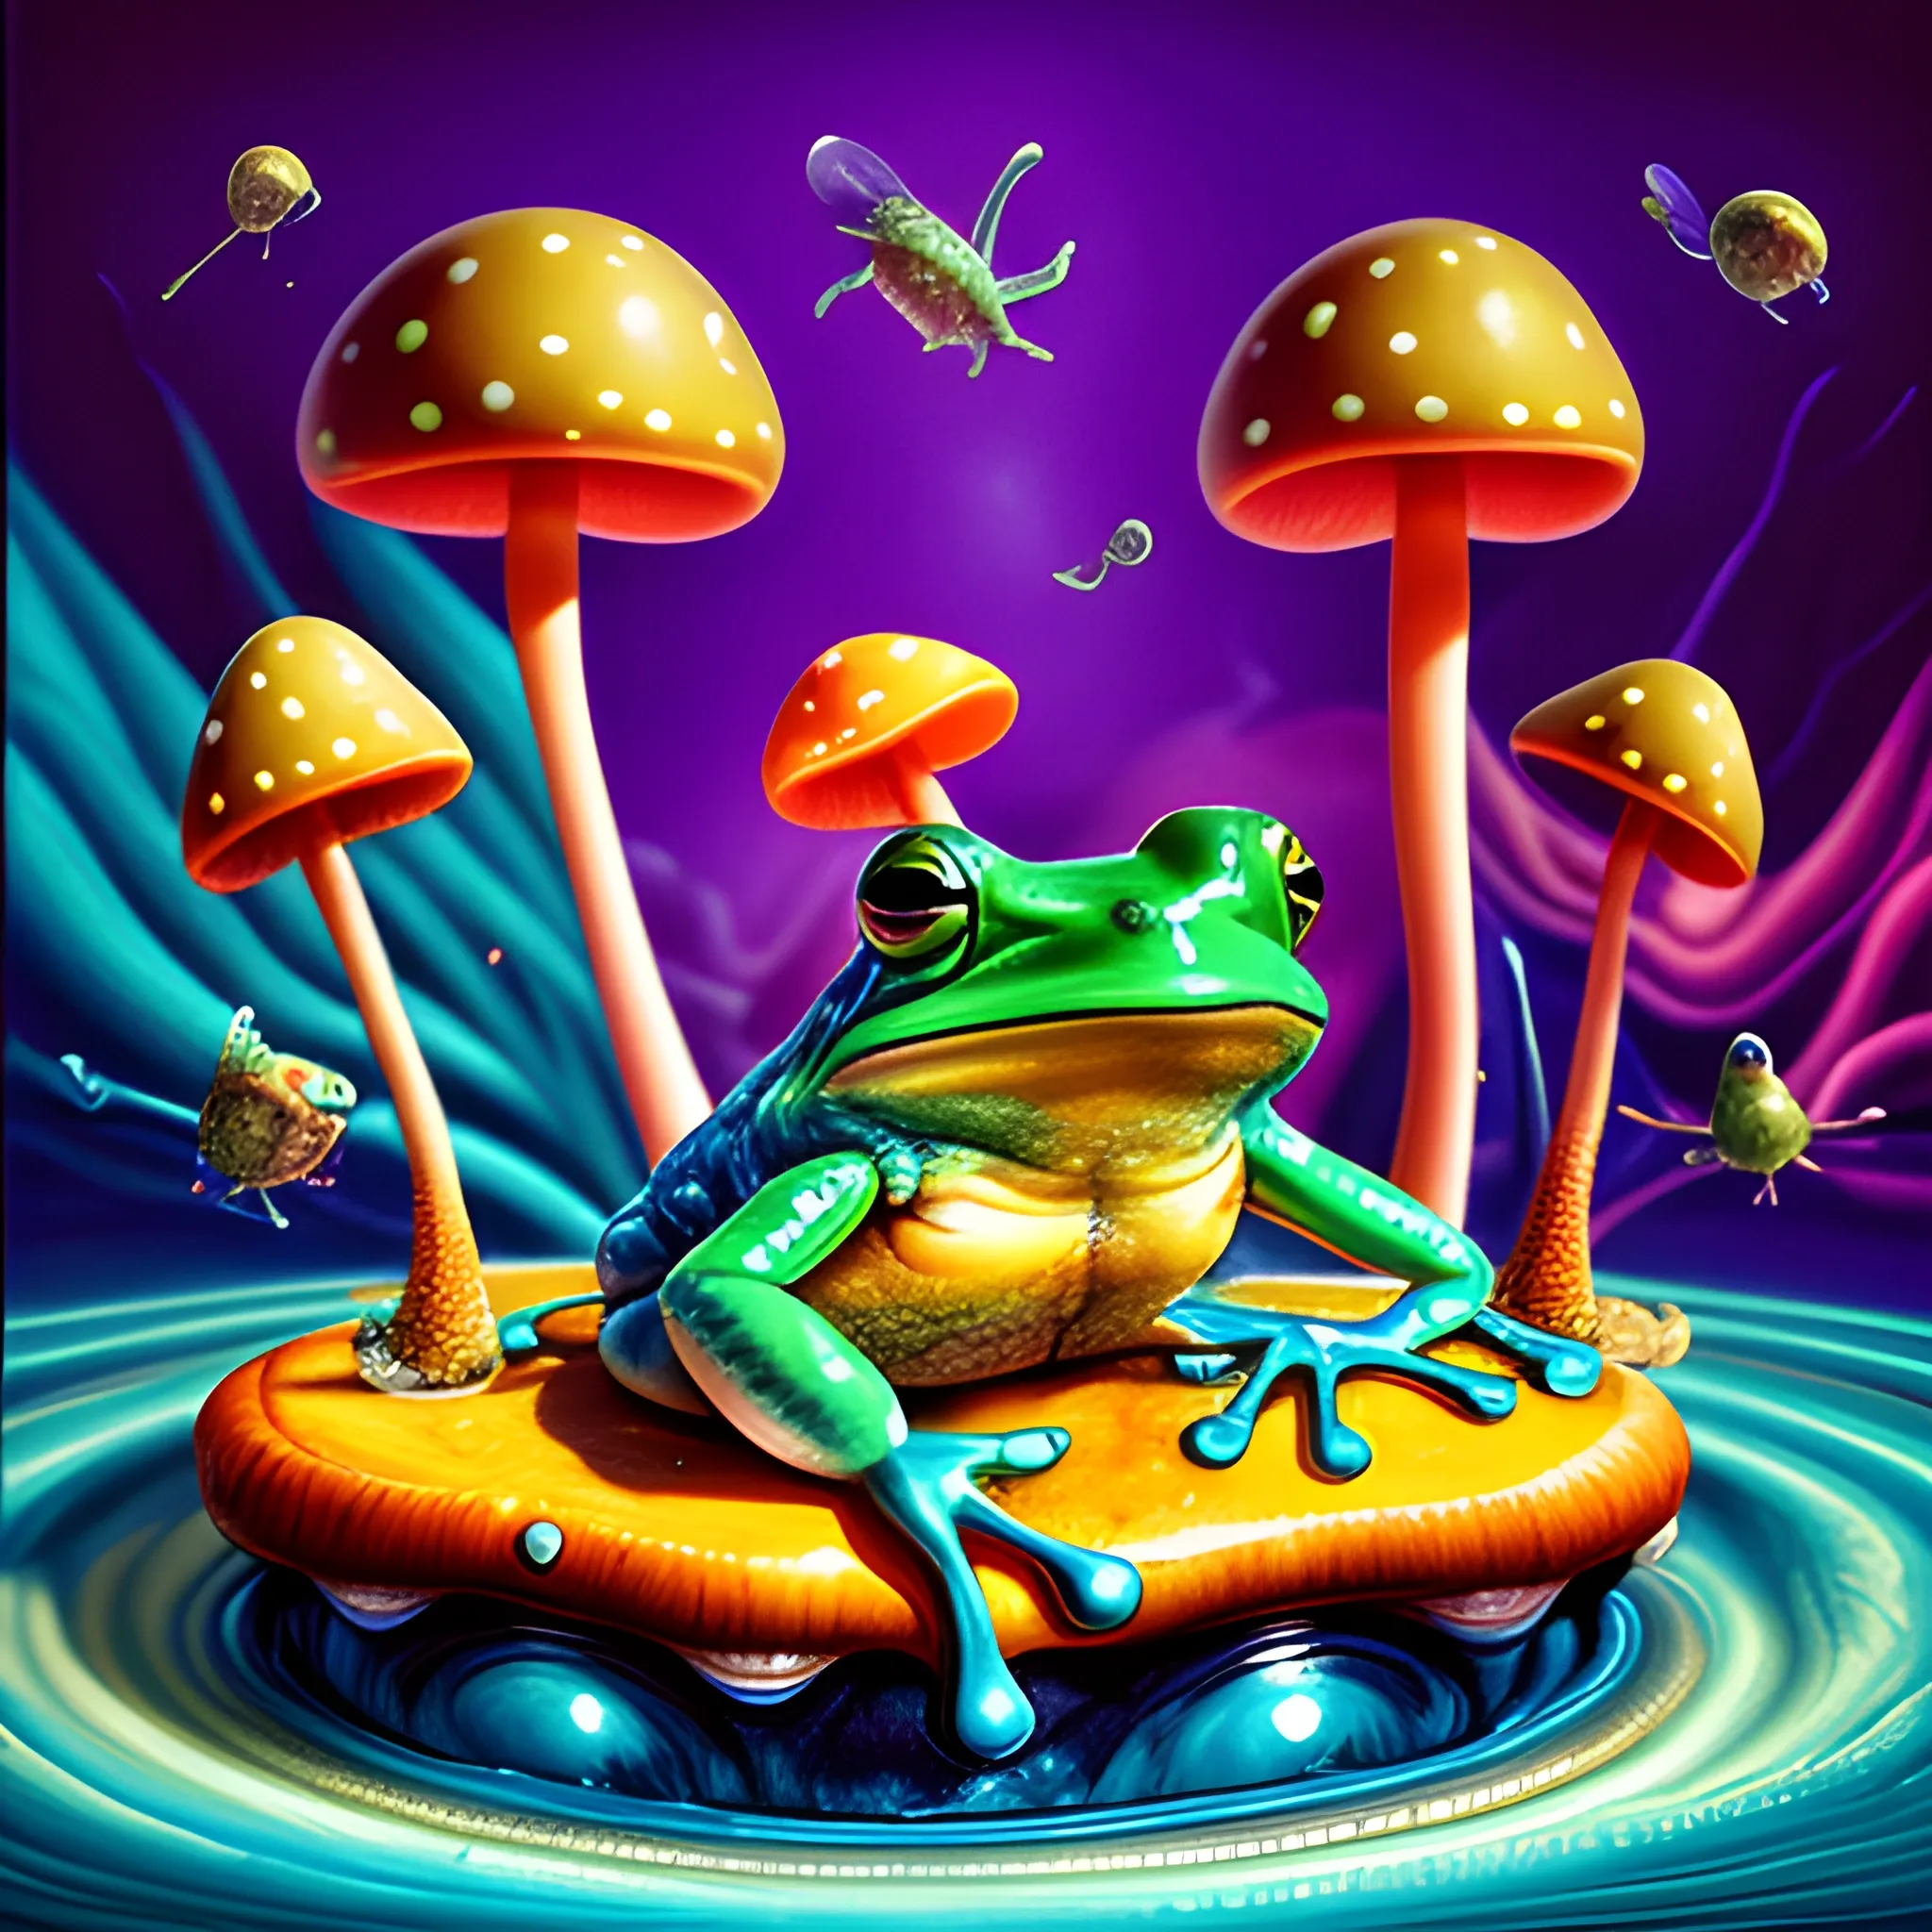 many frogs around, a mushrooms with human face, many ice cubes fly in the air , saturated colors, surrealism, chaotic background, 3D, Trippy,  eerie atmosphere, close up, Oil Painting, angular perspective 